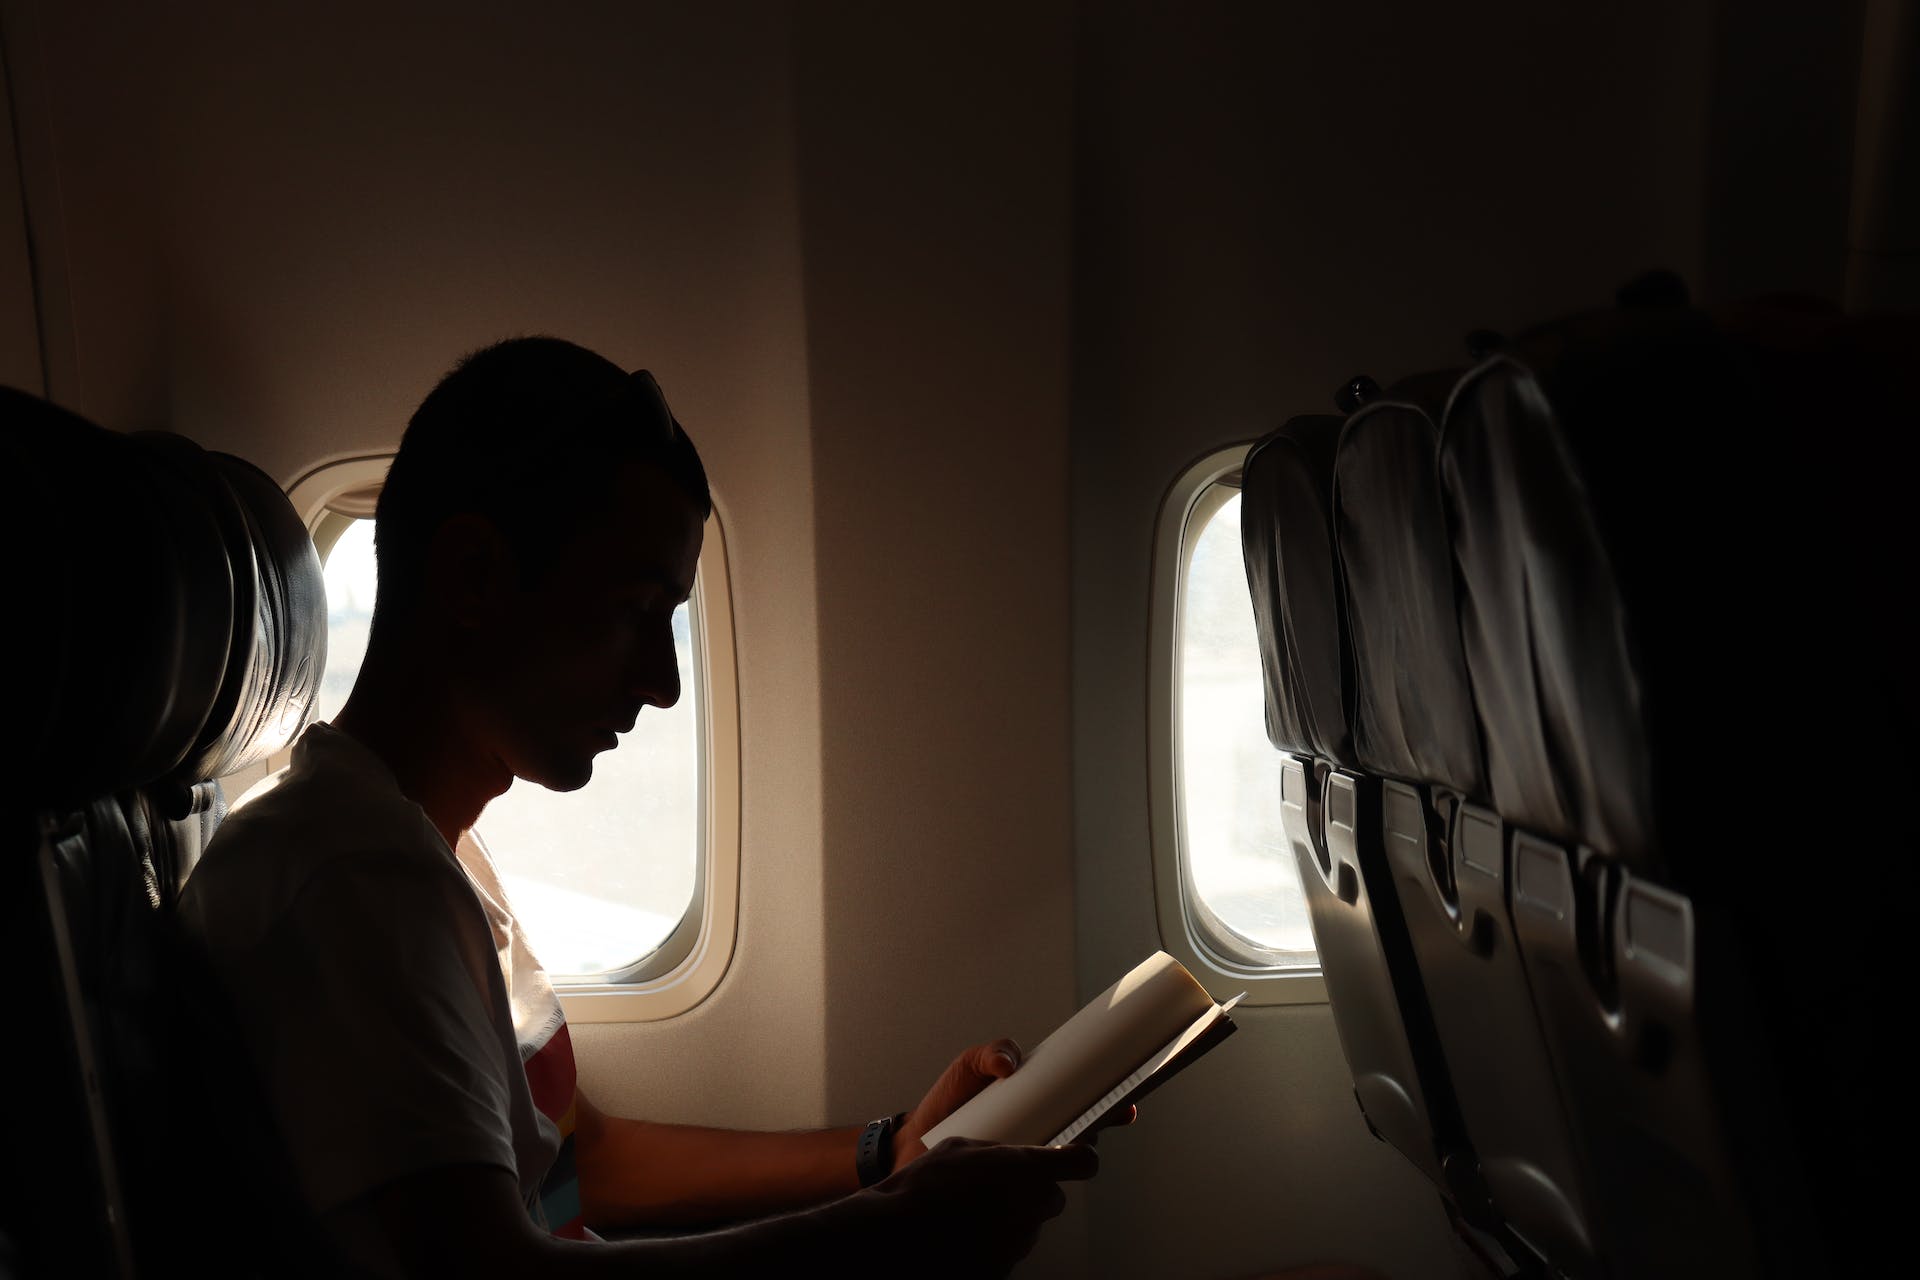 Silhouette of a man traveling in an airplane | Source: Pexels